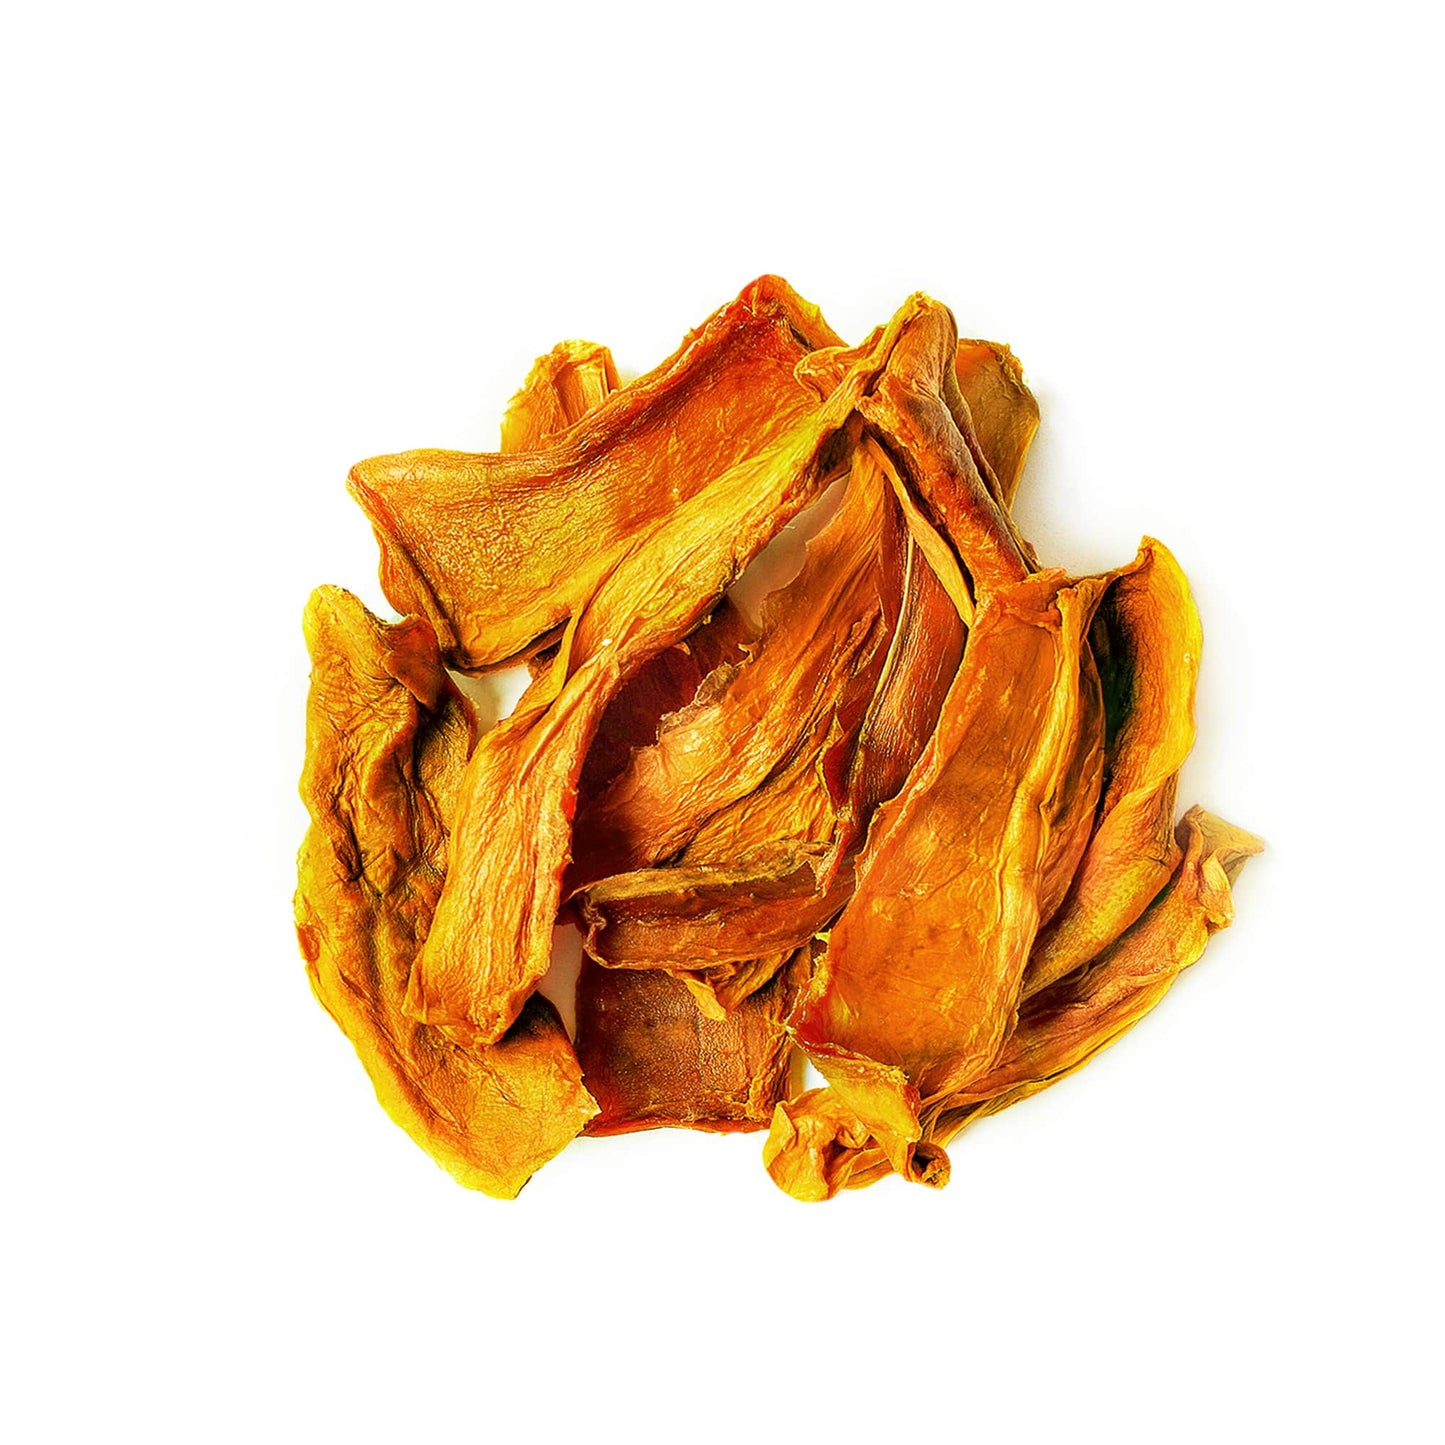 Organic Dried Mango Strips – Non-GMO, Unsulphured, Unsweetened and Delicious Fruit Snack, Chewy and Naturally A Good Source of Energy and Fiber, Vegan, Kosher Food in Bulk